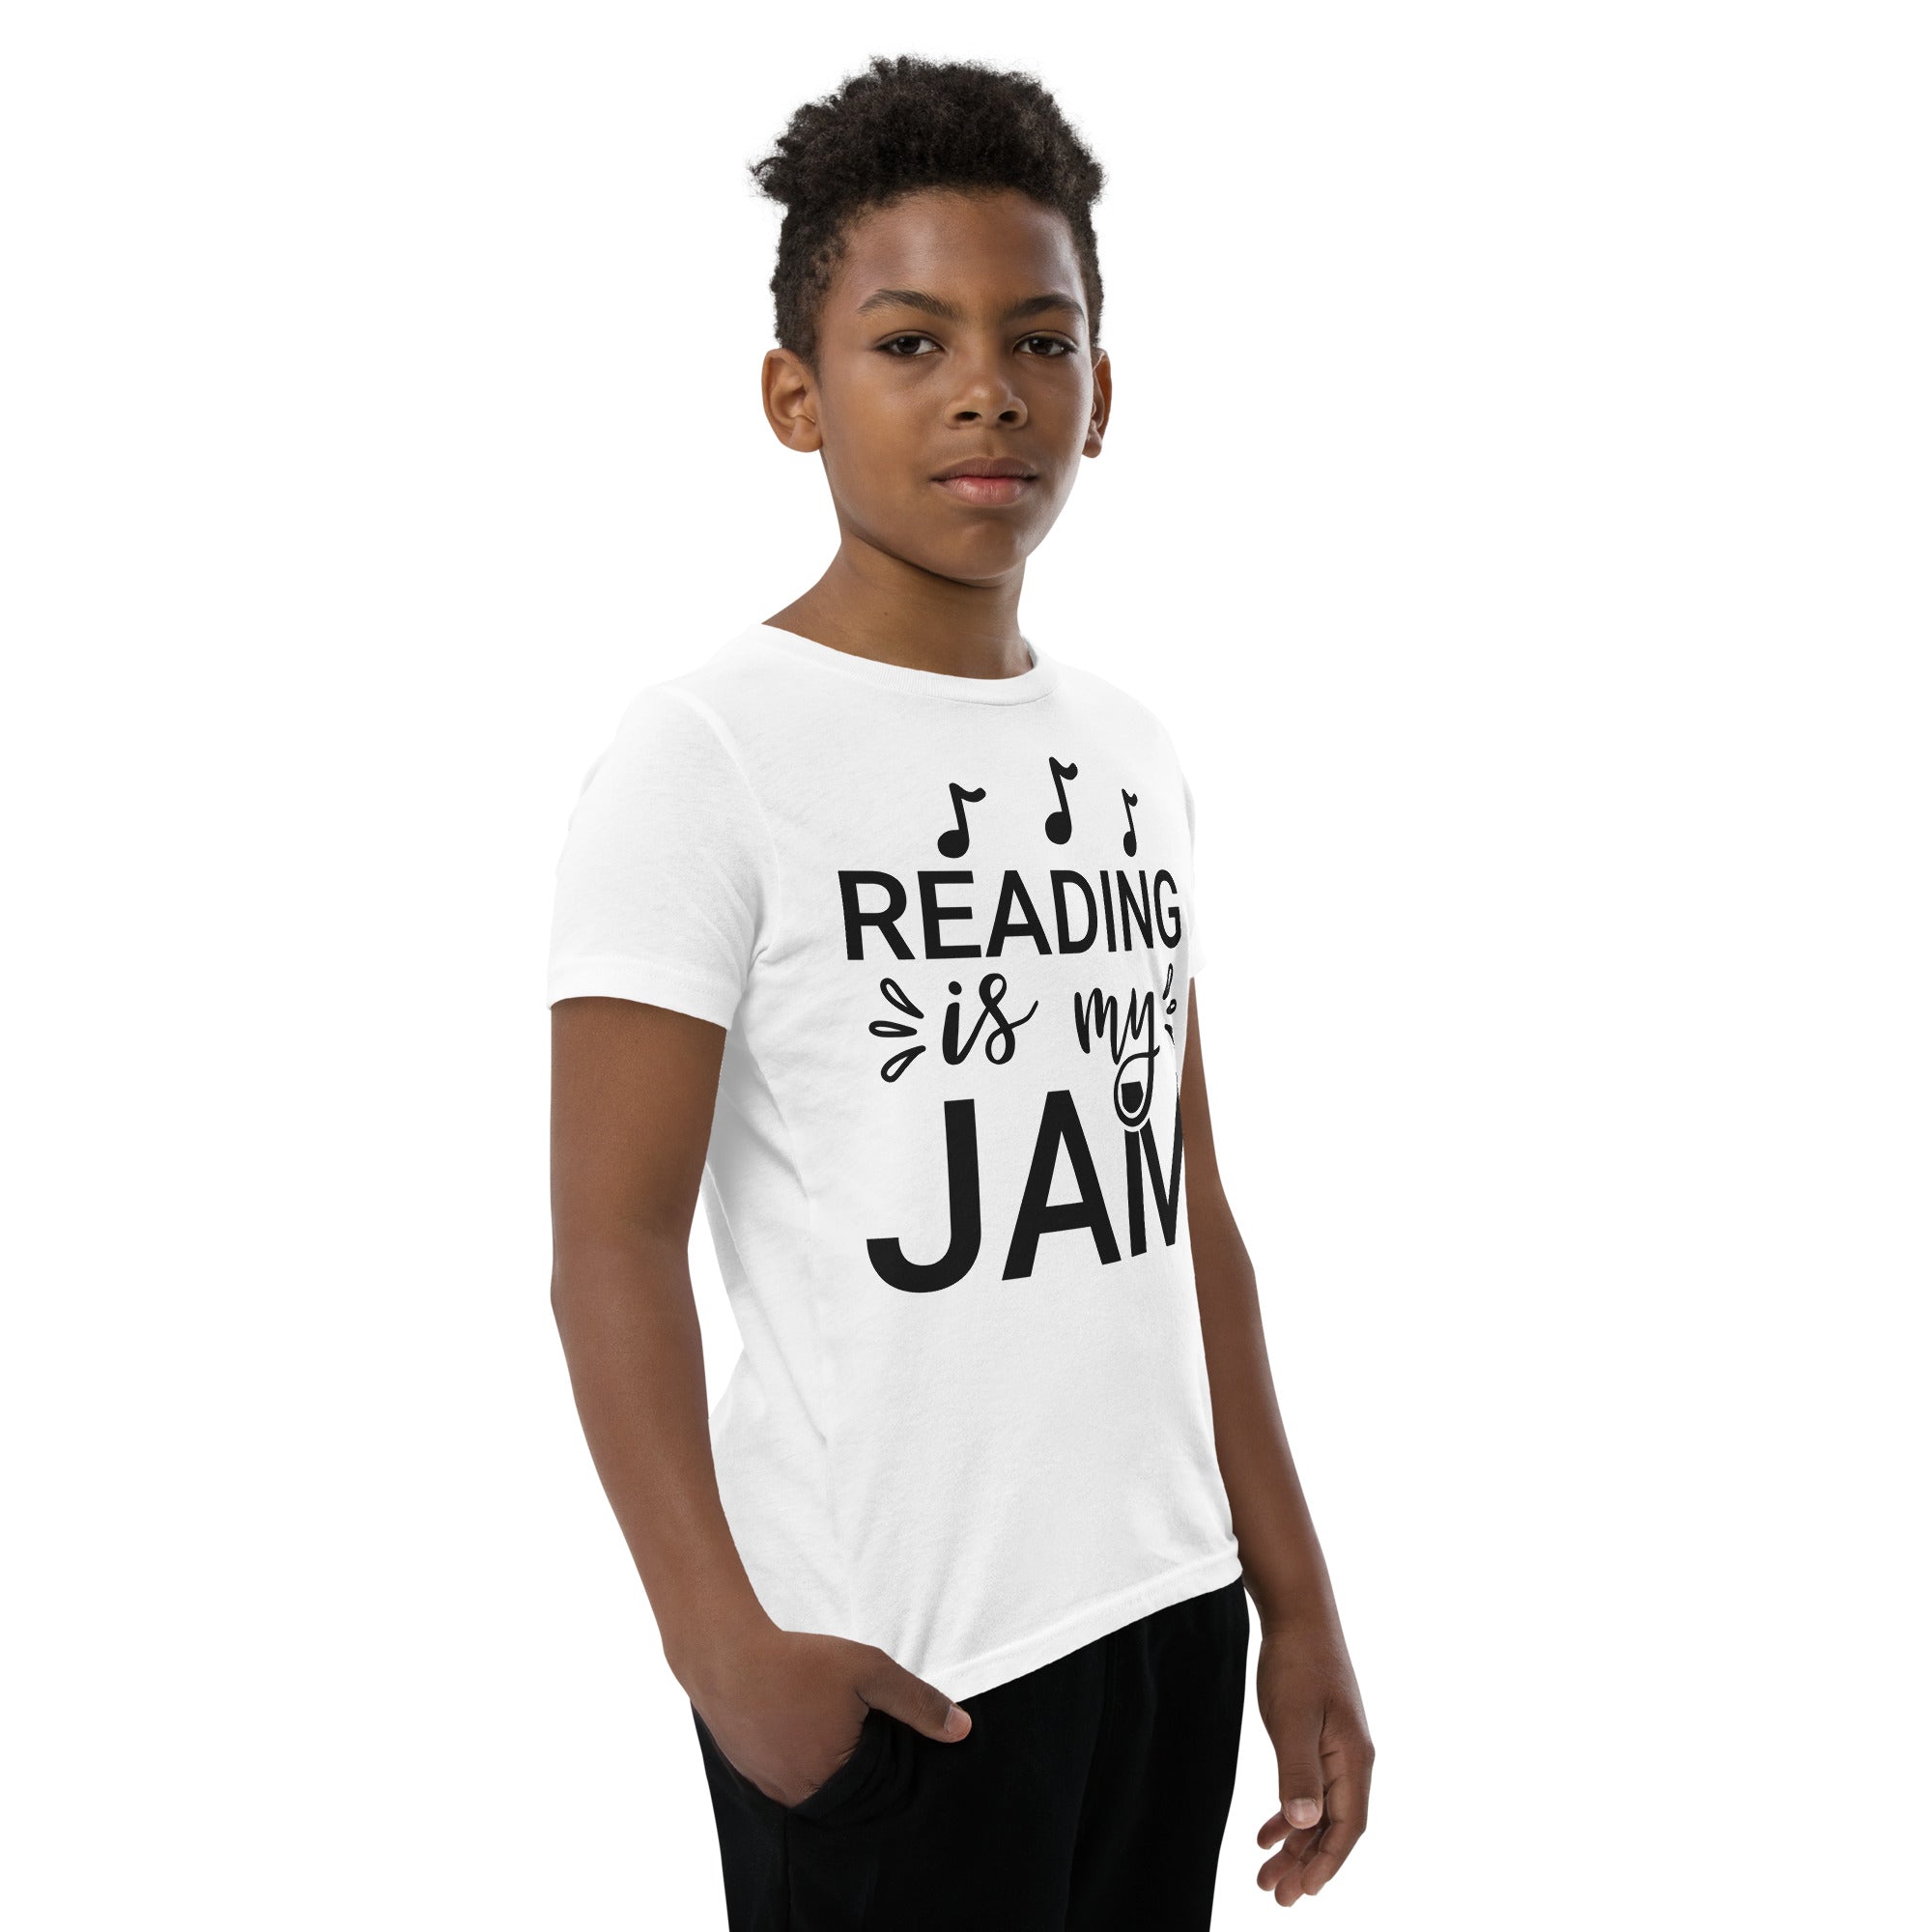 Youth Short Sleeve T-Shirt, Reading is my Jam, T shirt, back to School T shirt